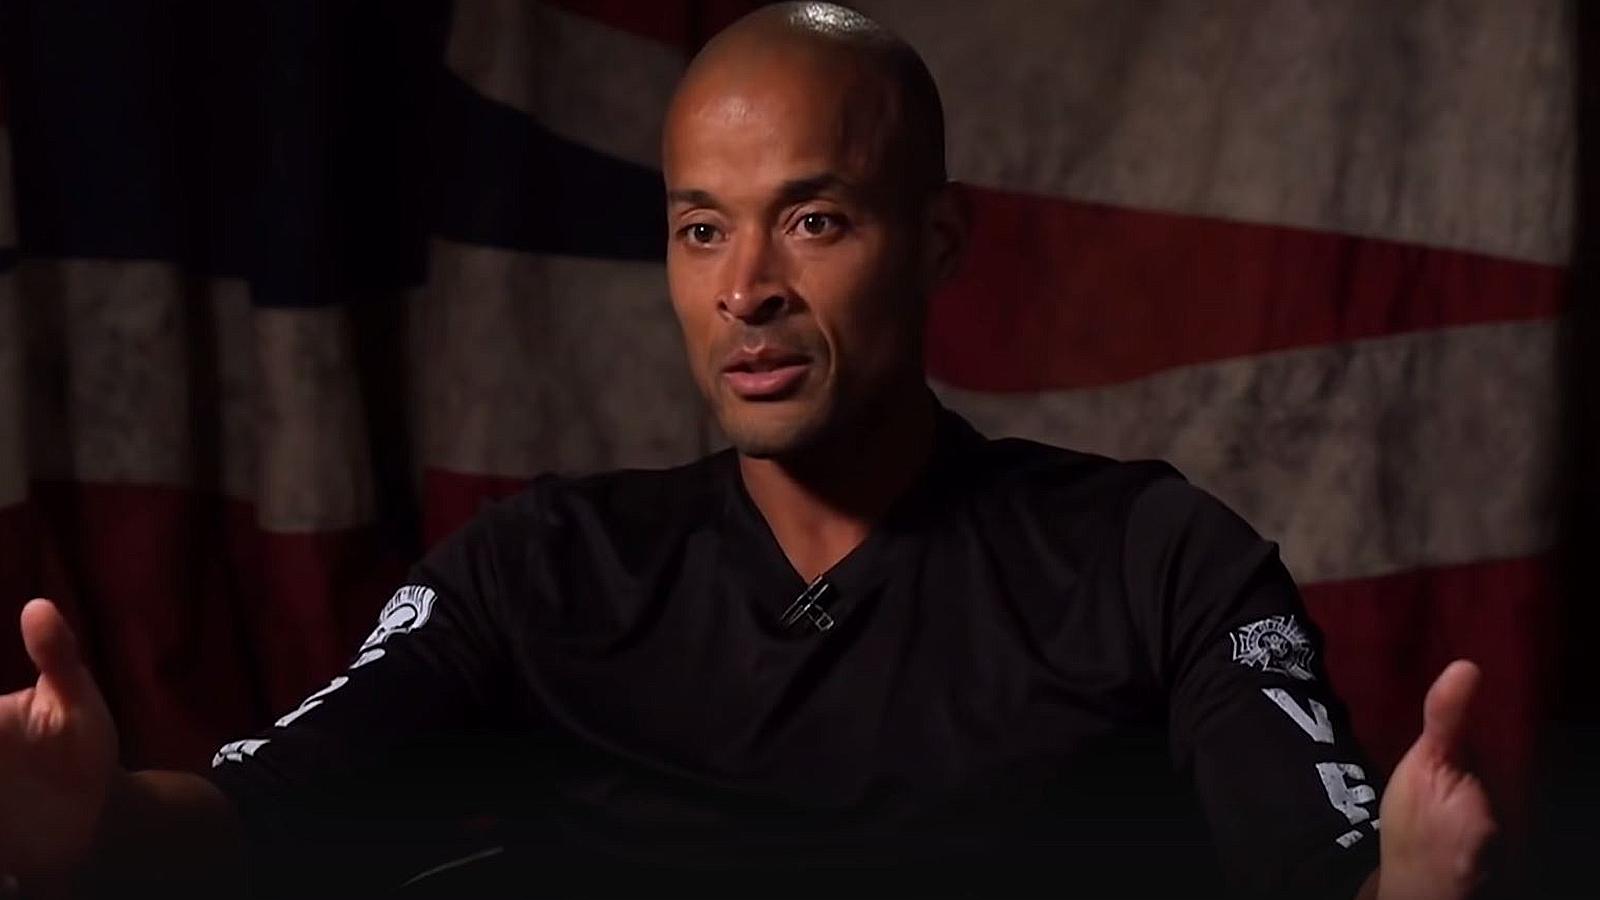 David Goggins' fiancé reveals what it's like to live with him - Dexerto